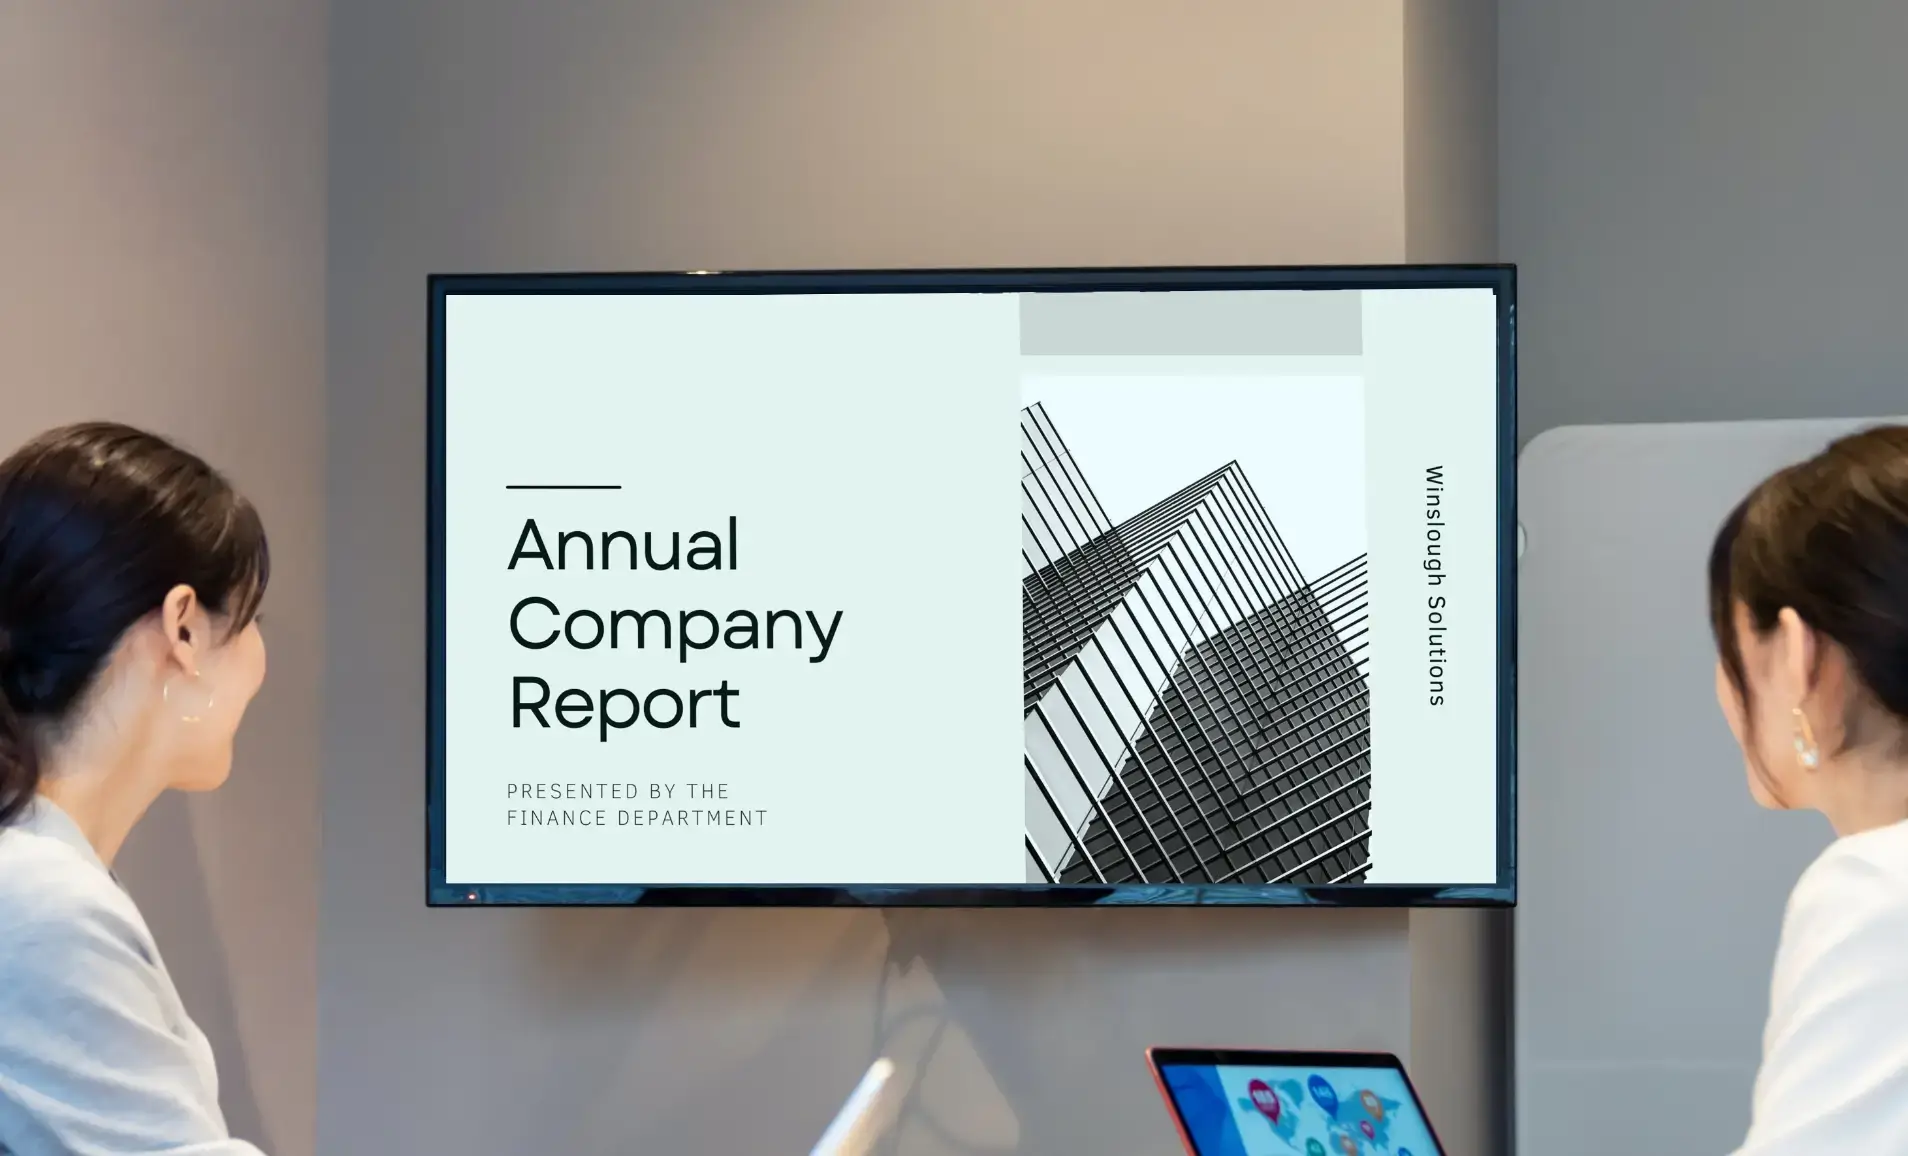 meeting room digital signage displaying annual company report presentation from Google Slides app